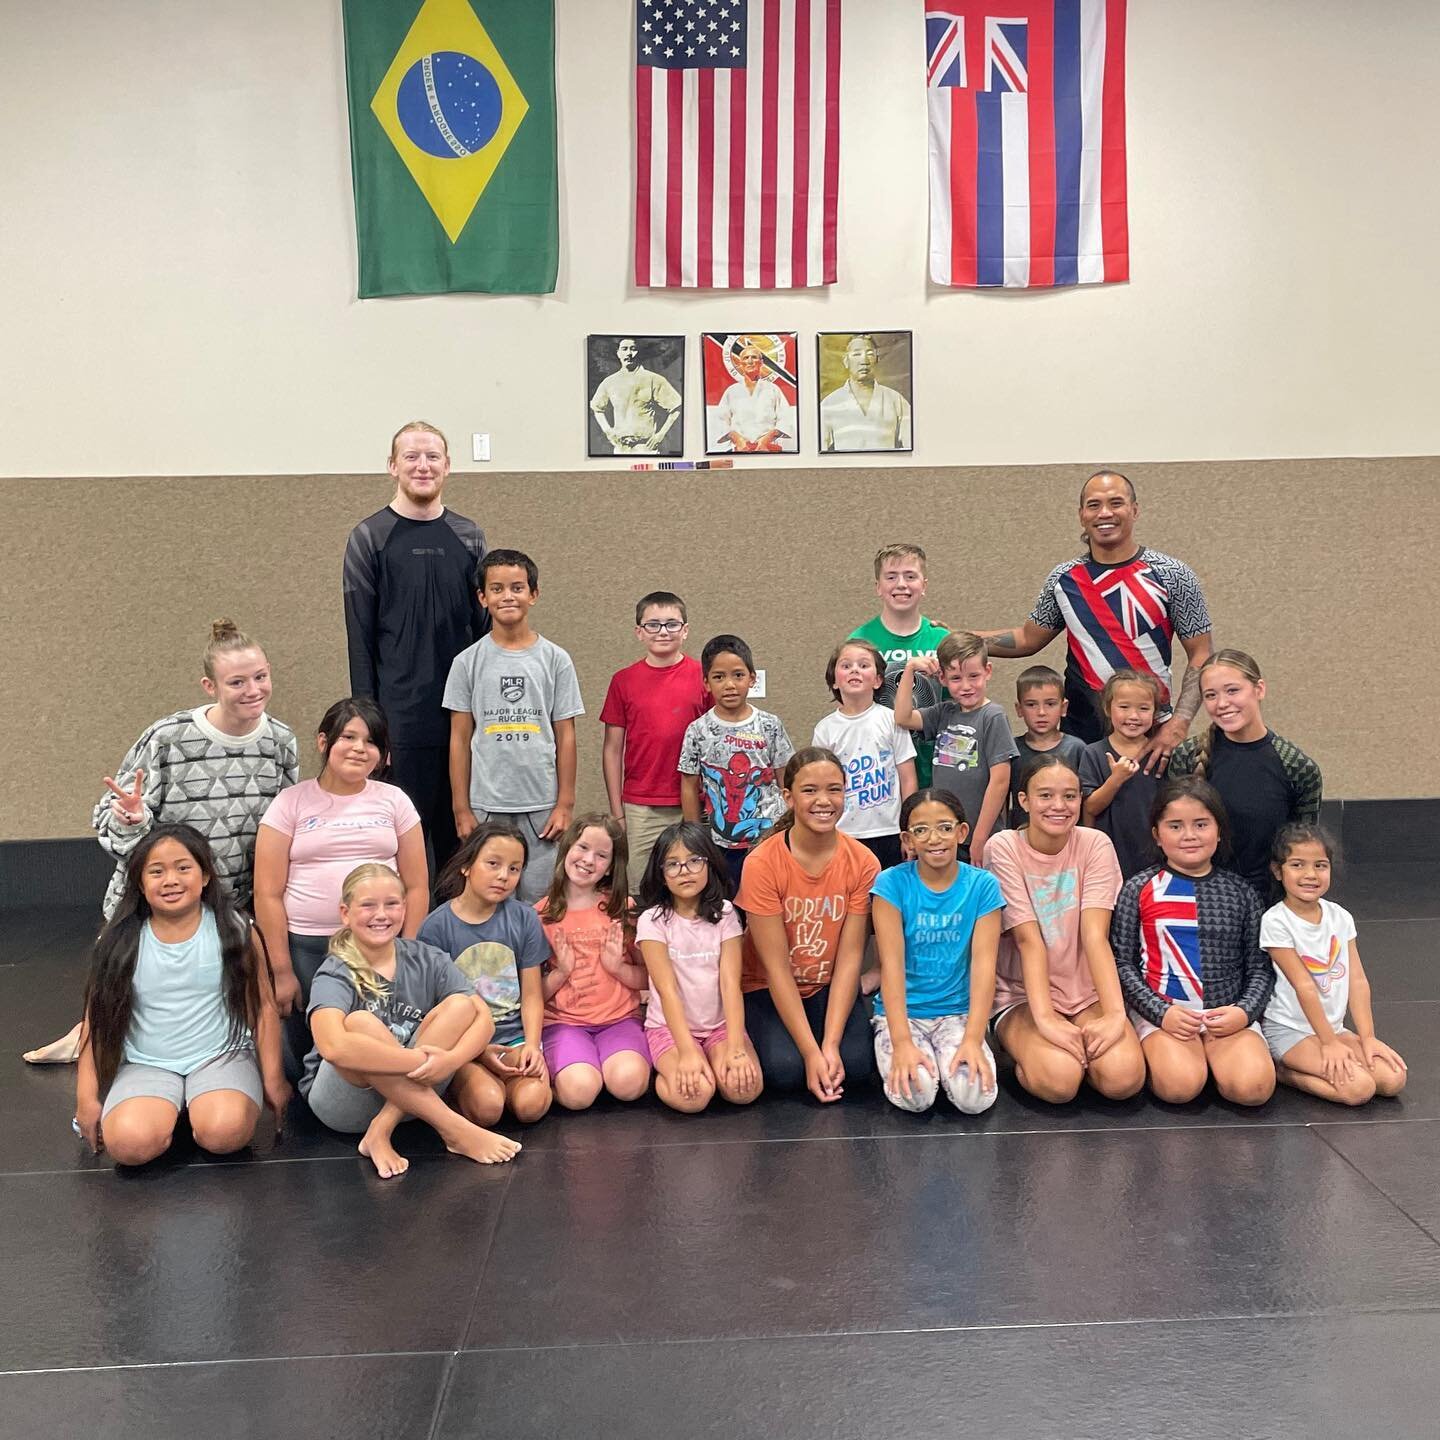 Grateful to these kiddos and their parents who sacrifice so much to have them on the mats. 

Much aloha to you all! 🤙🏽❤️